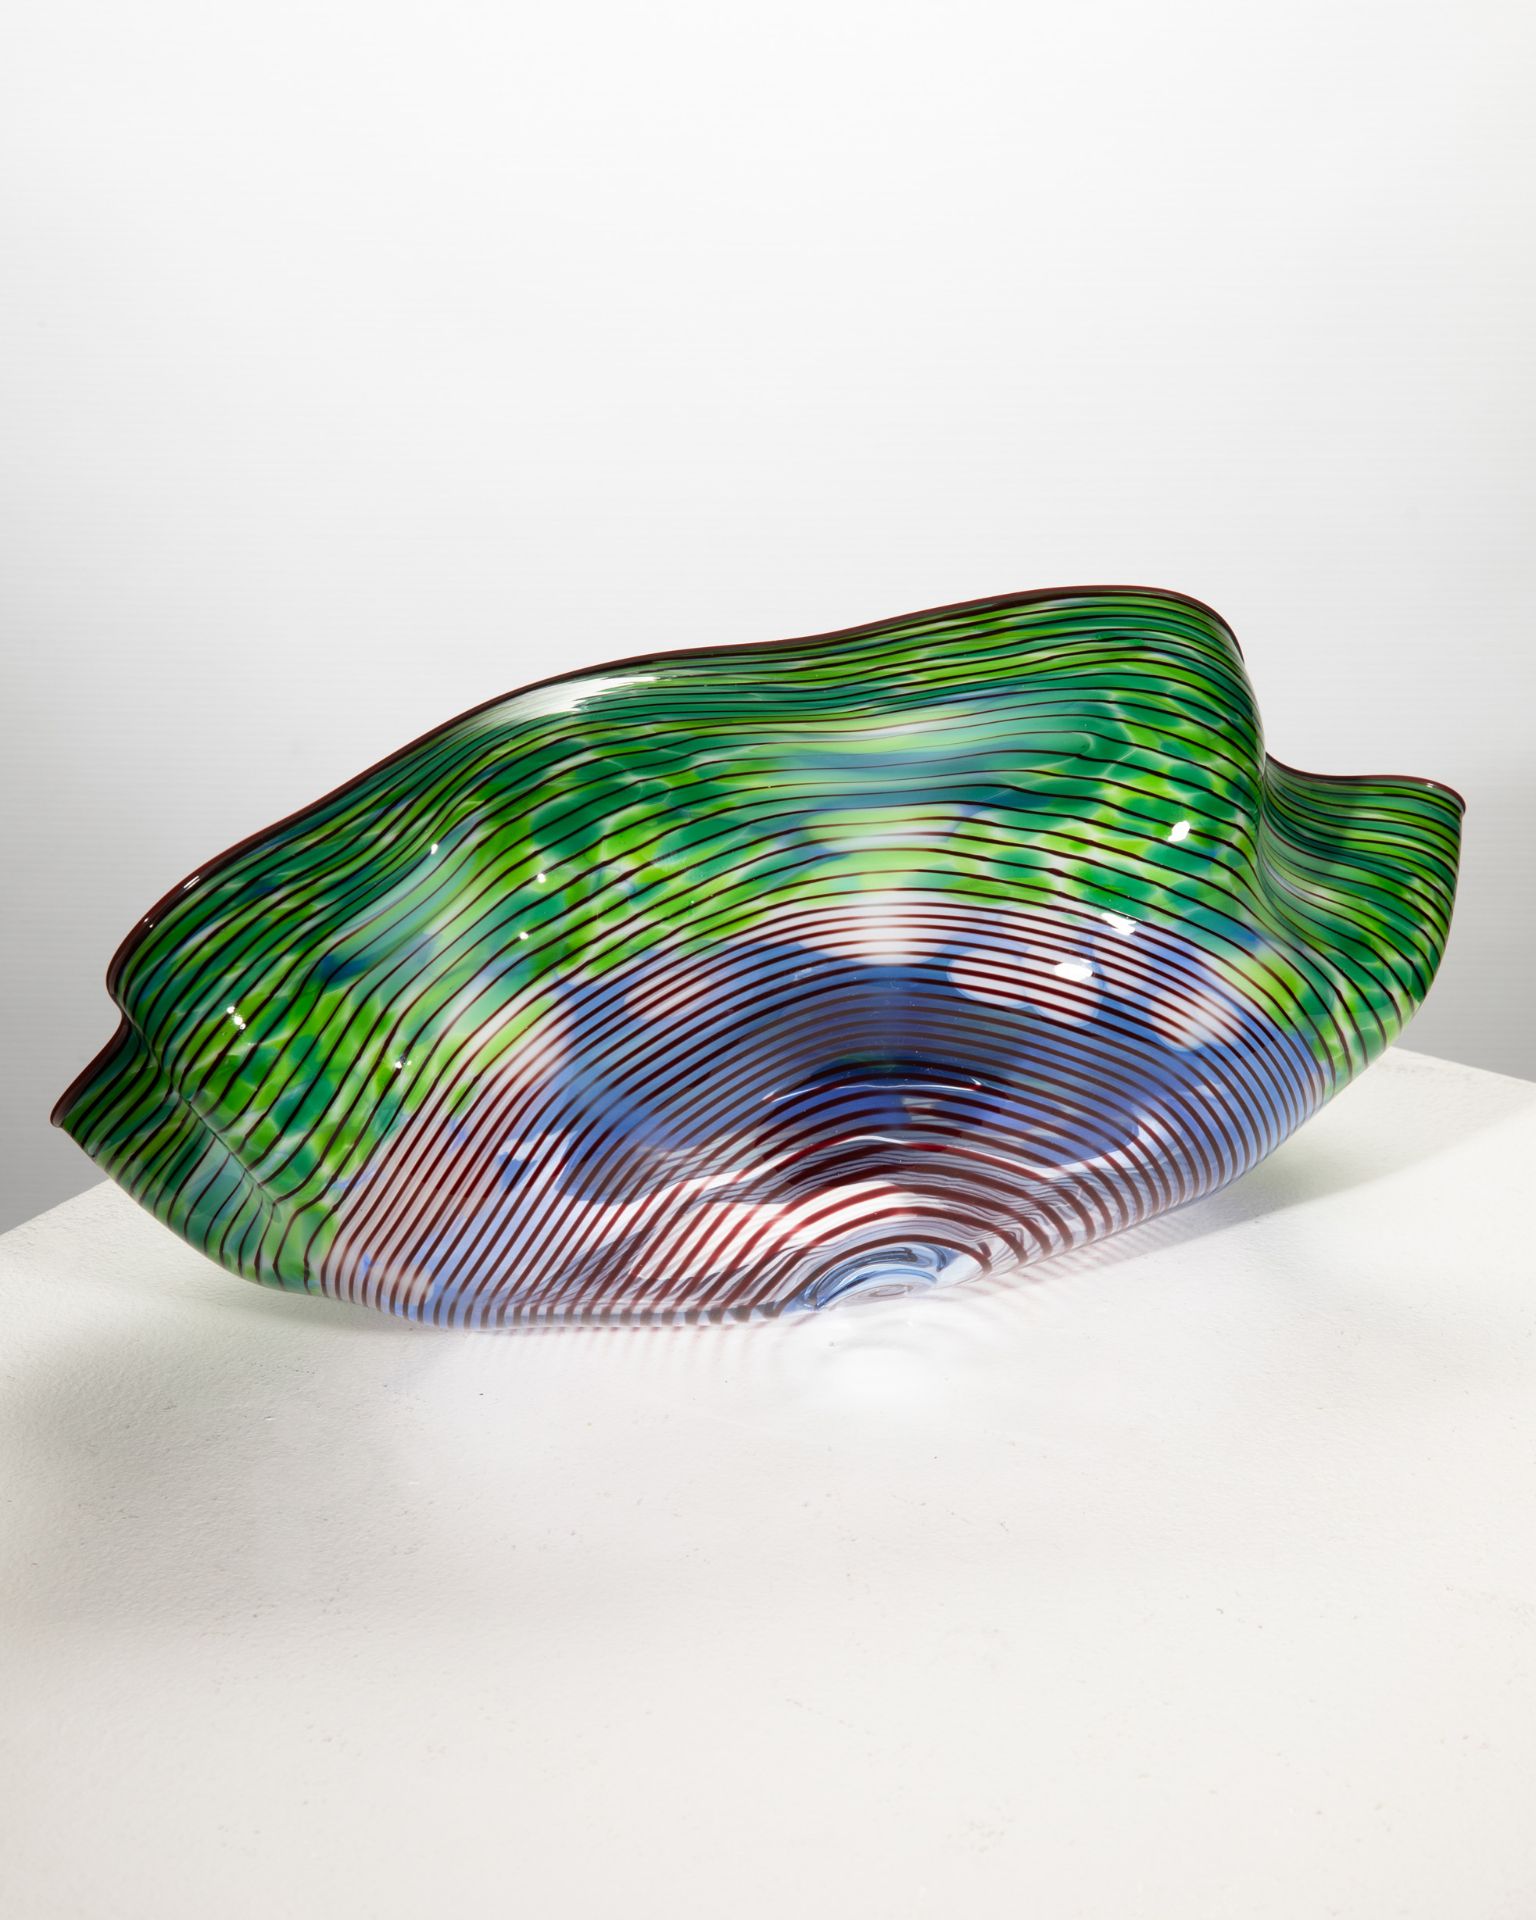 Dale Chihuly, 3 seaforms piece sculptural glasforms - Image 4 of 17